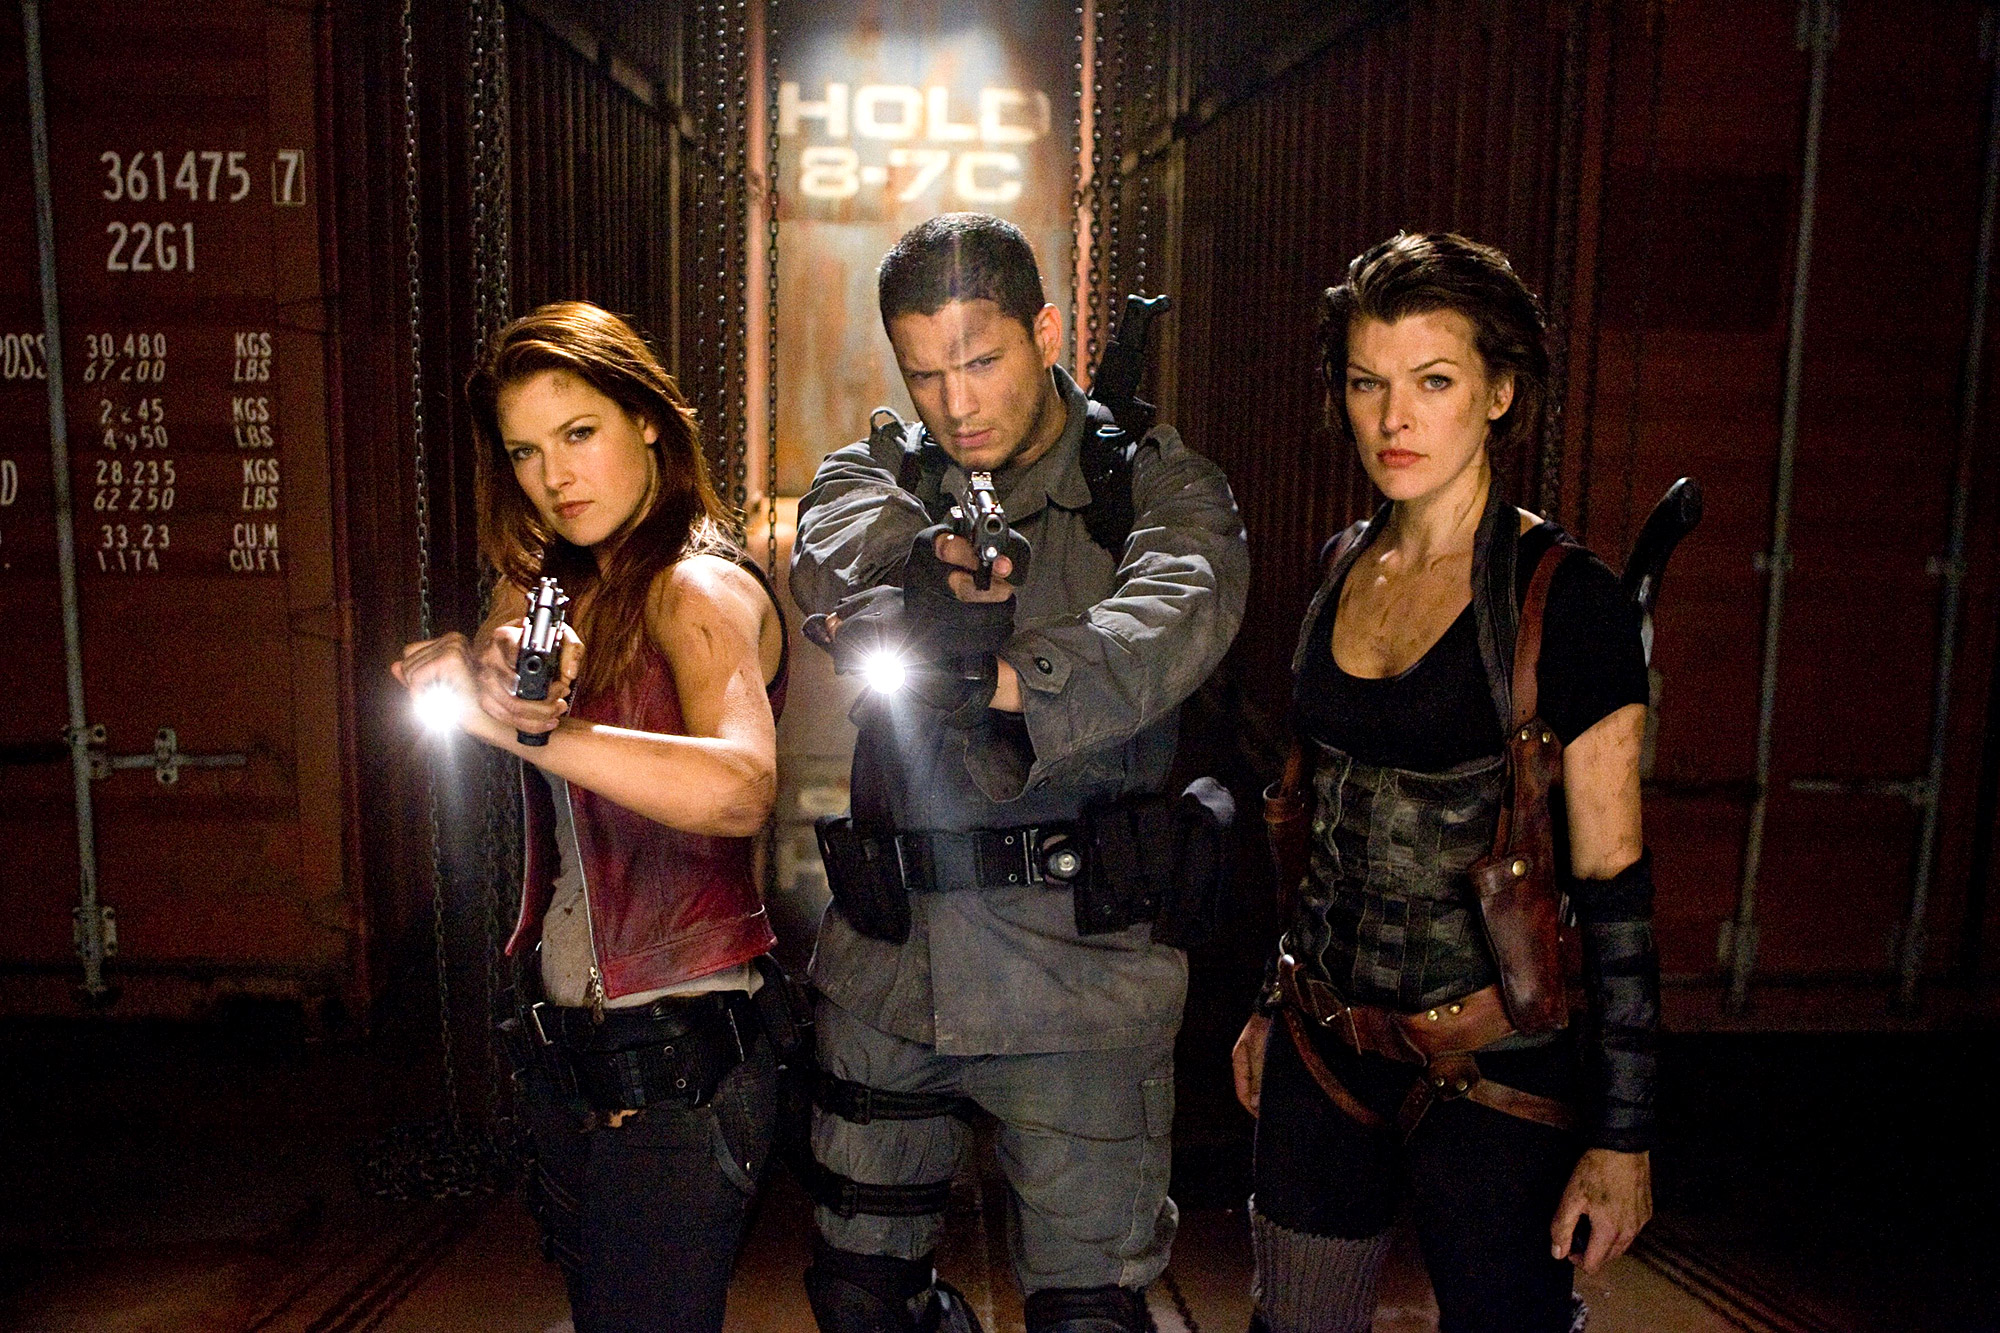 Meet the Cast of Resident Evil: The Final Chapter